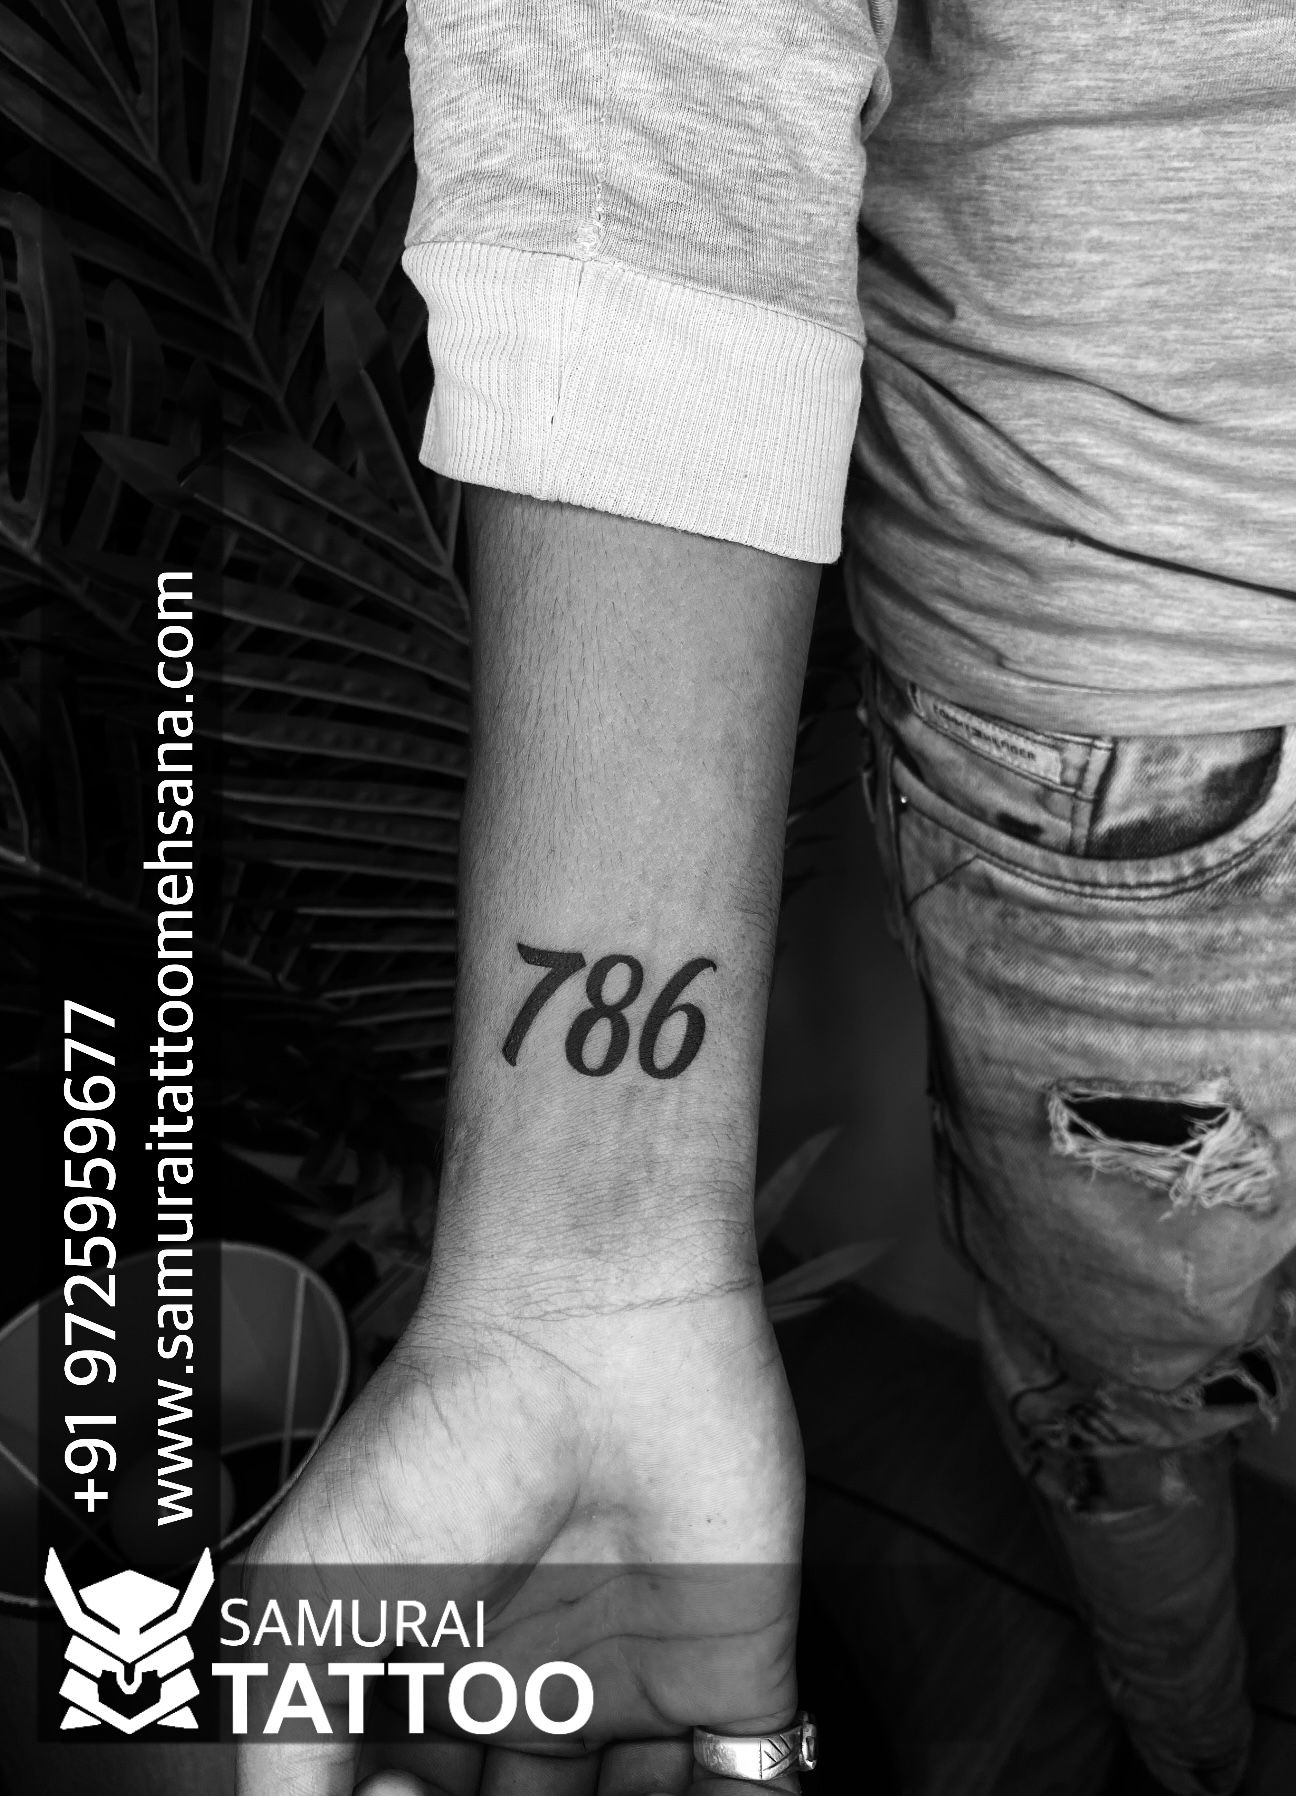 70+ Best Roman Numeral Tattoo Designs & Meanings - Be Creative (2019)